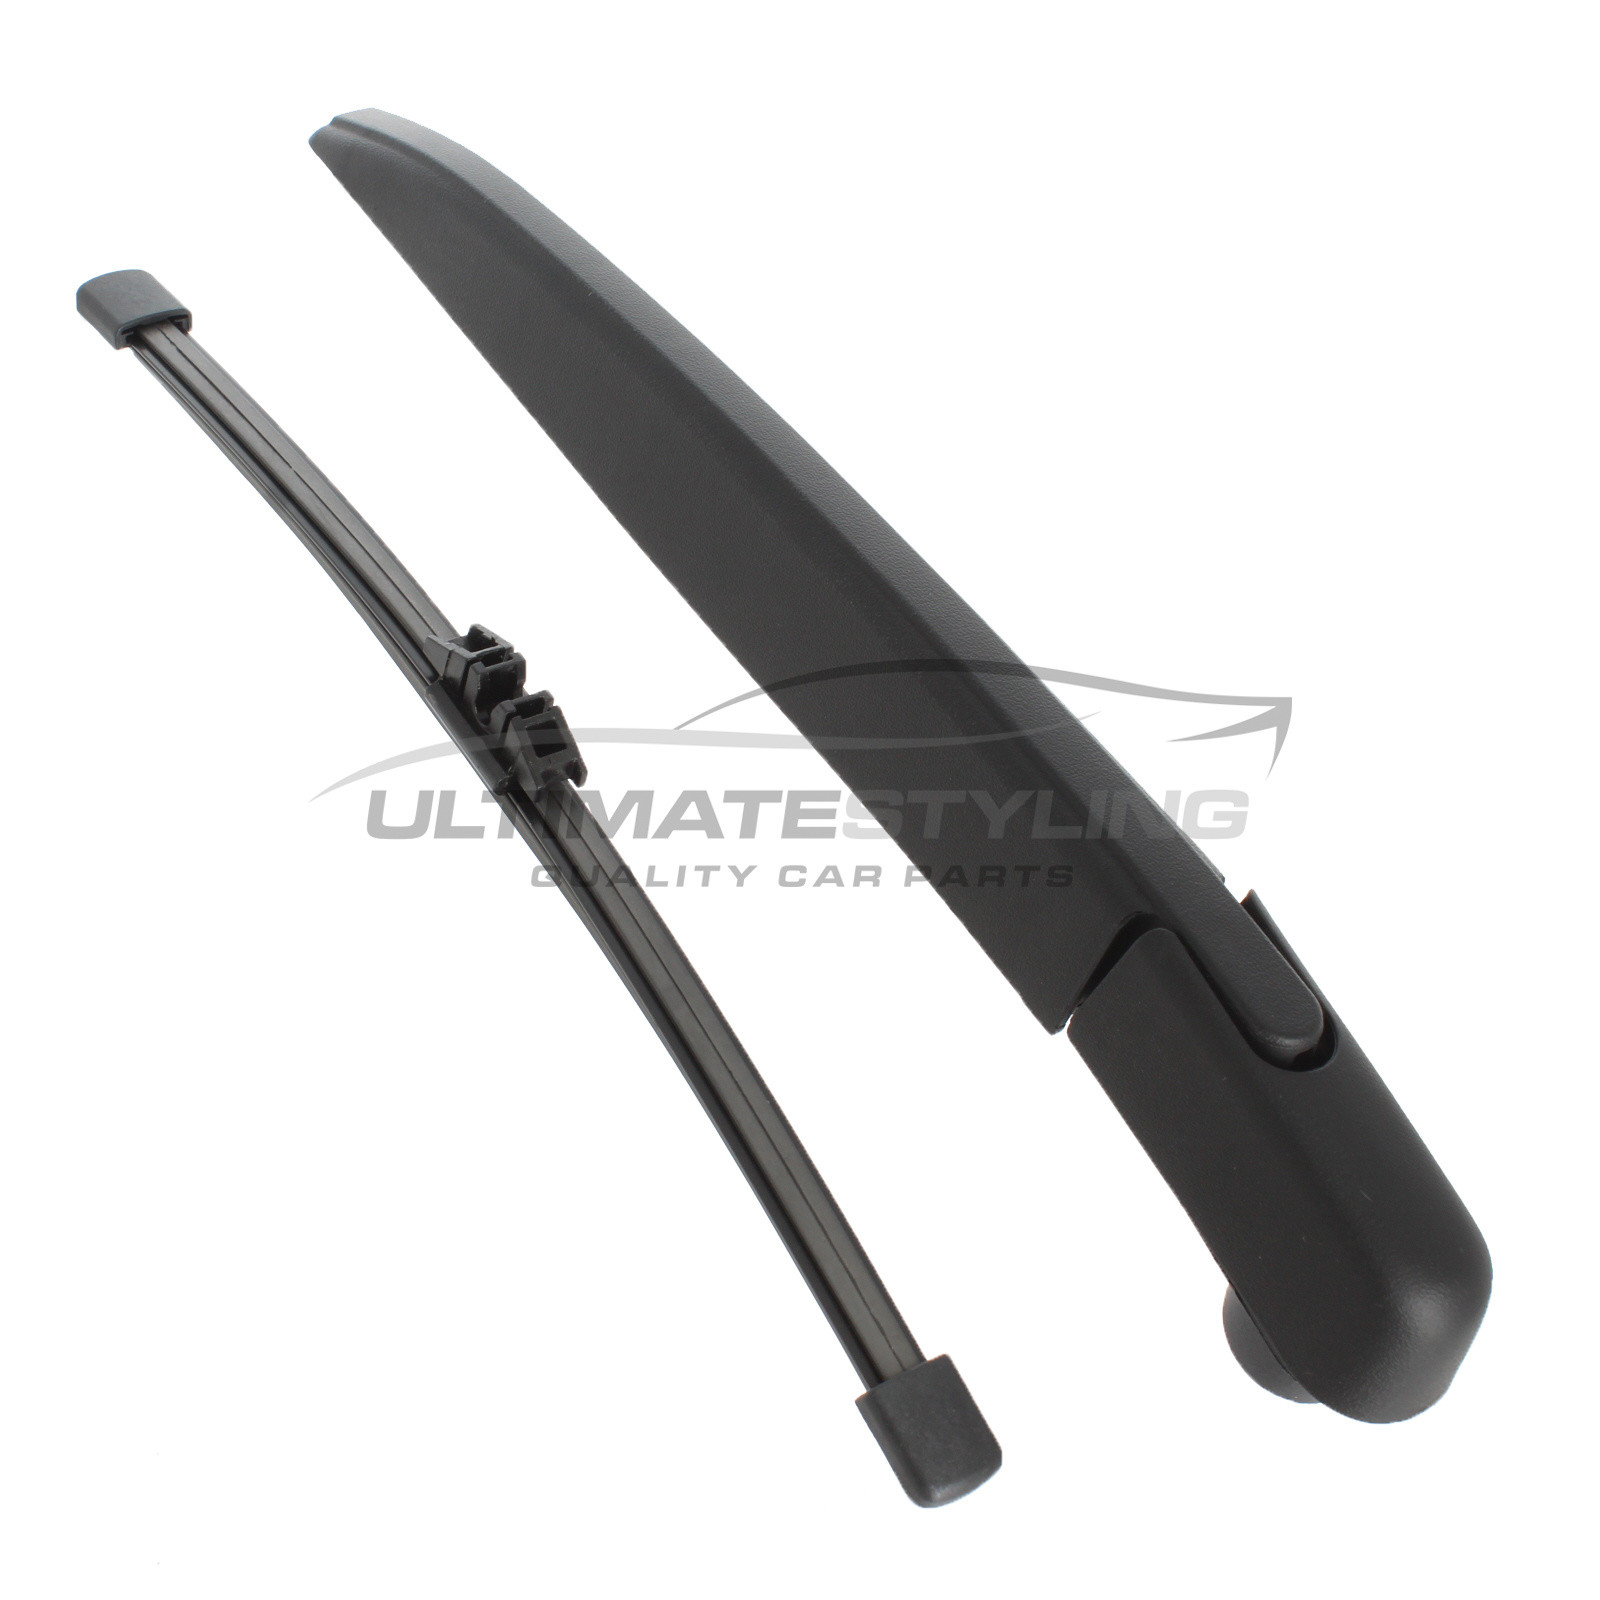 Rear Wiper Arm & Blade Set for Renault Clio